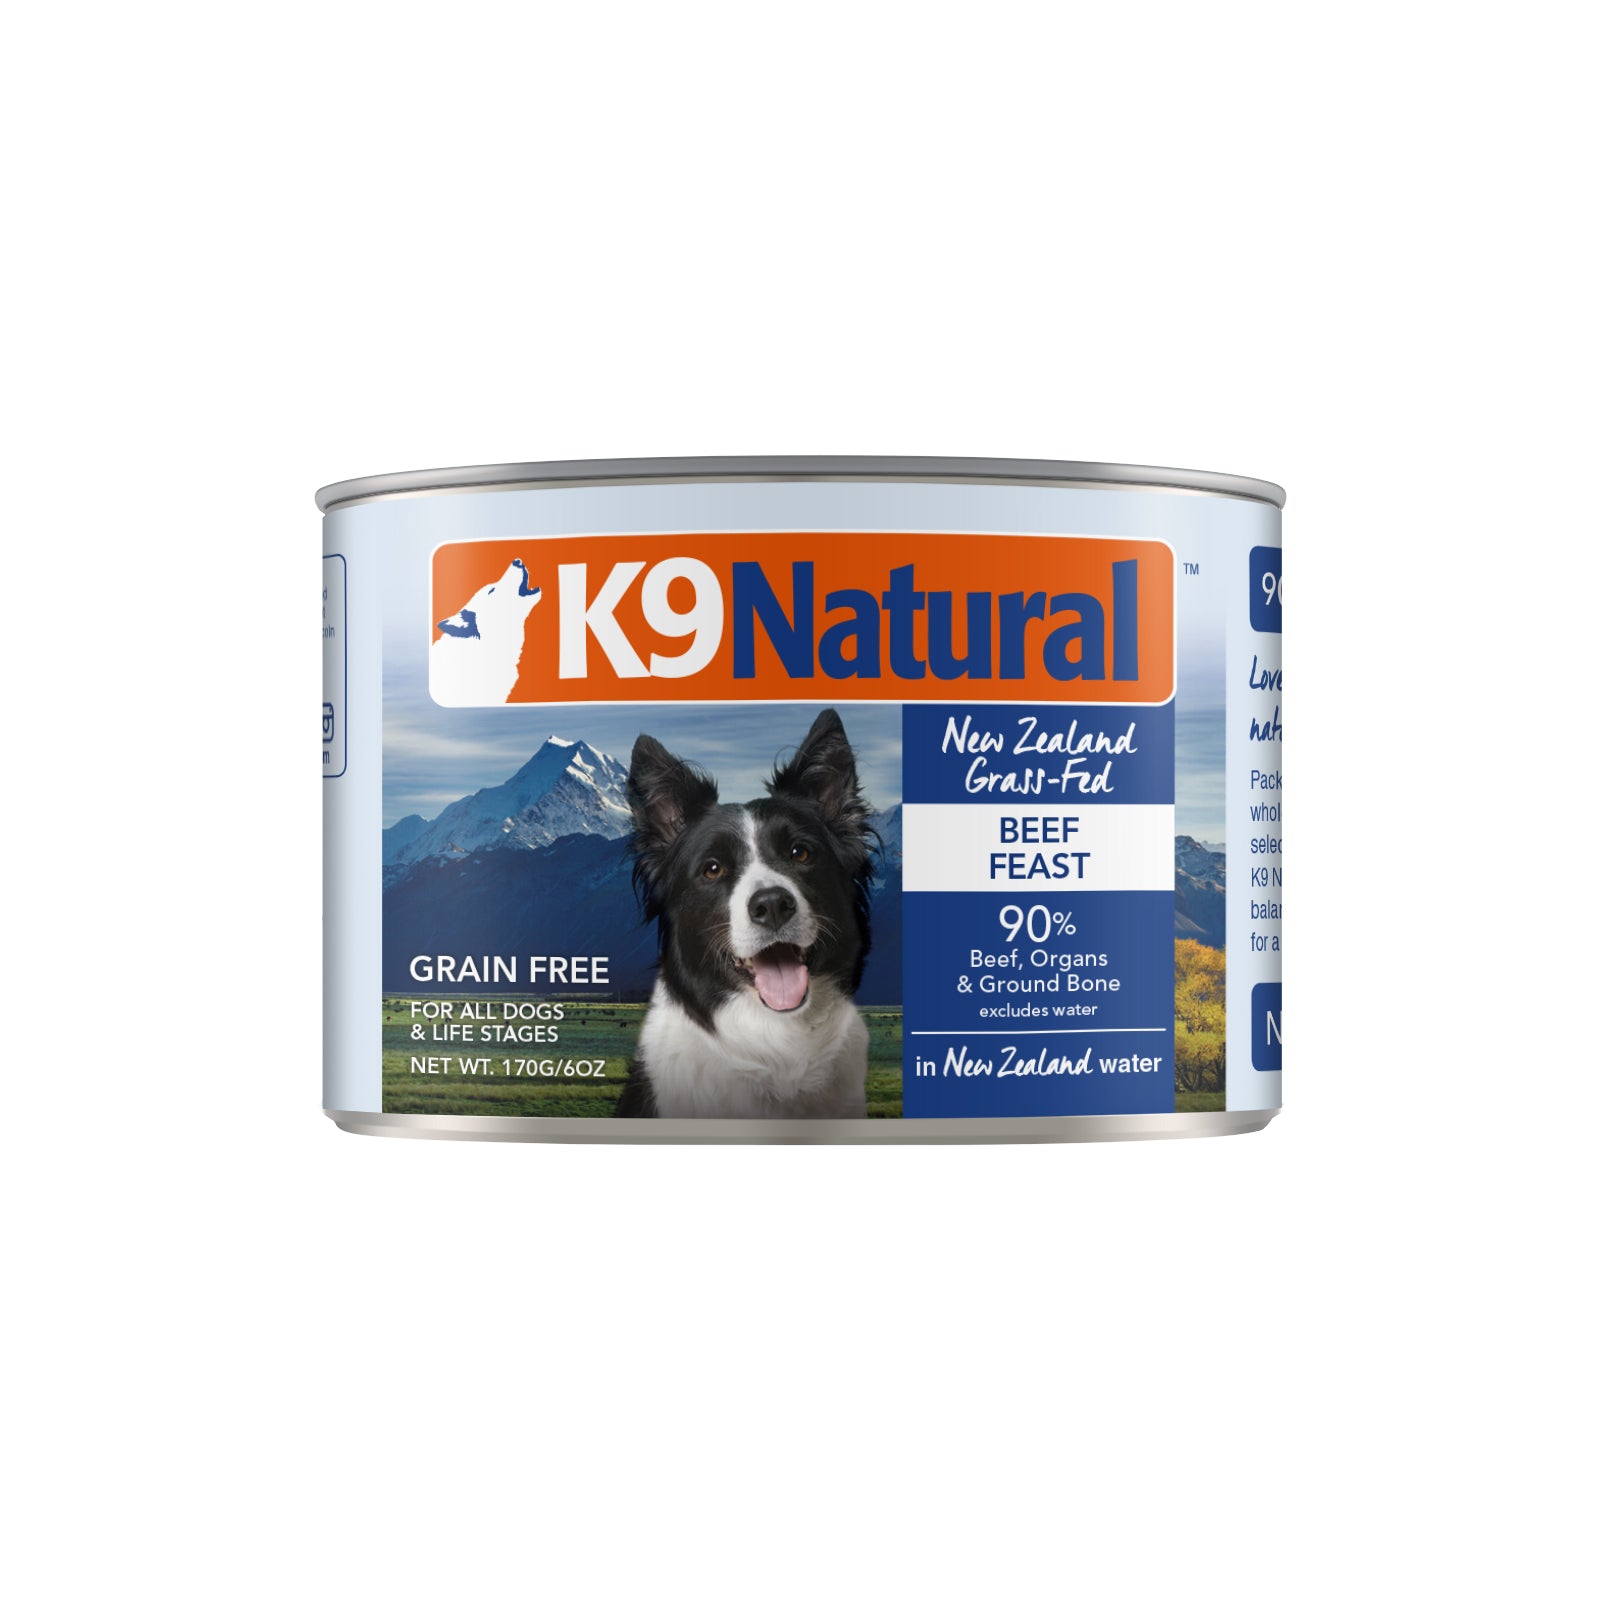 K9 Natural Canned Beef Wet Food for Dog (7556805984498)